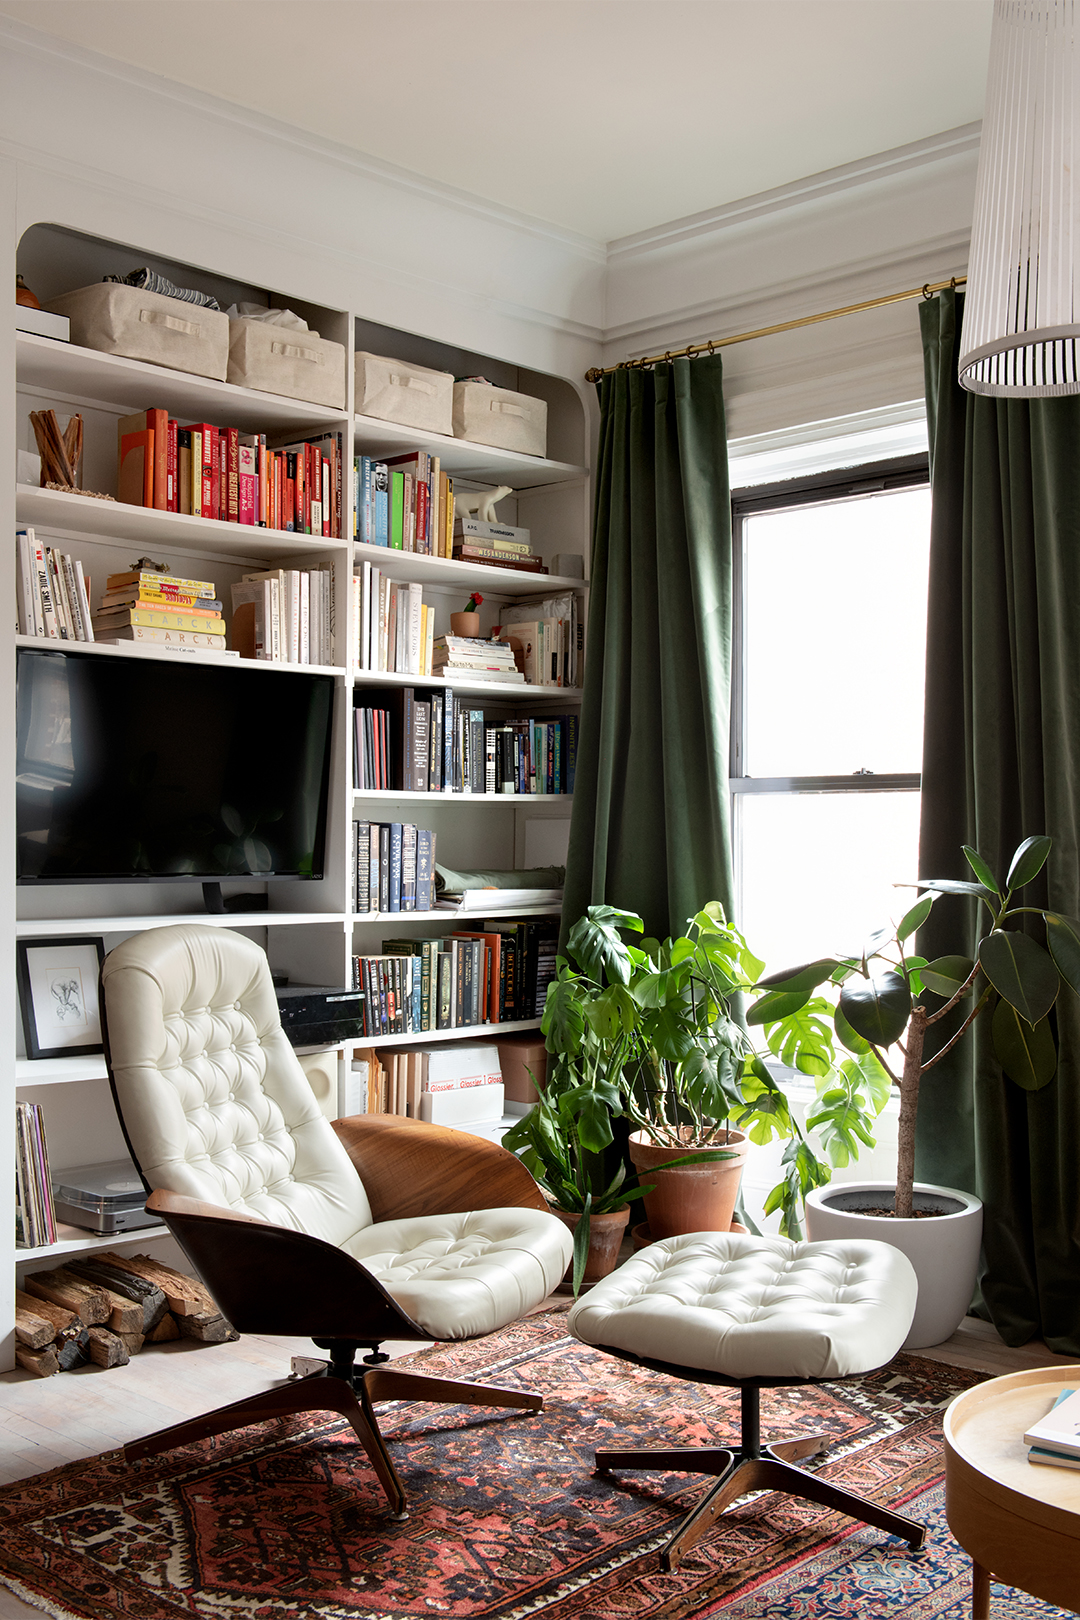 Eames-style chair in living room